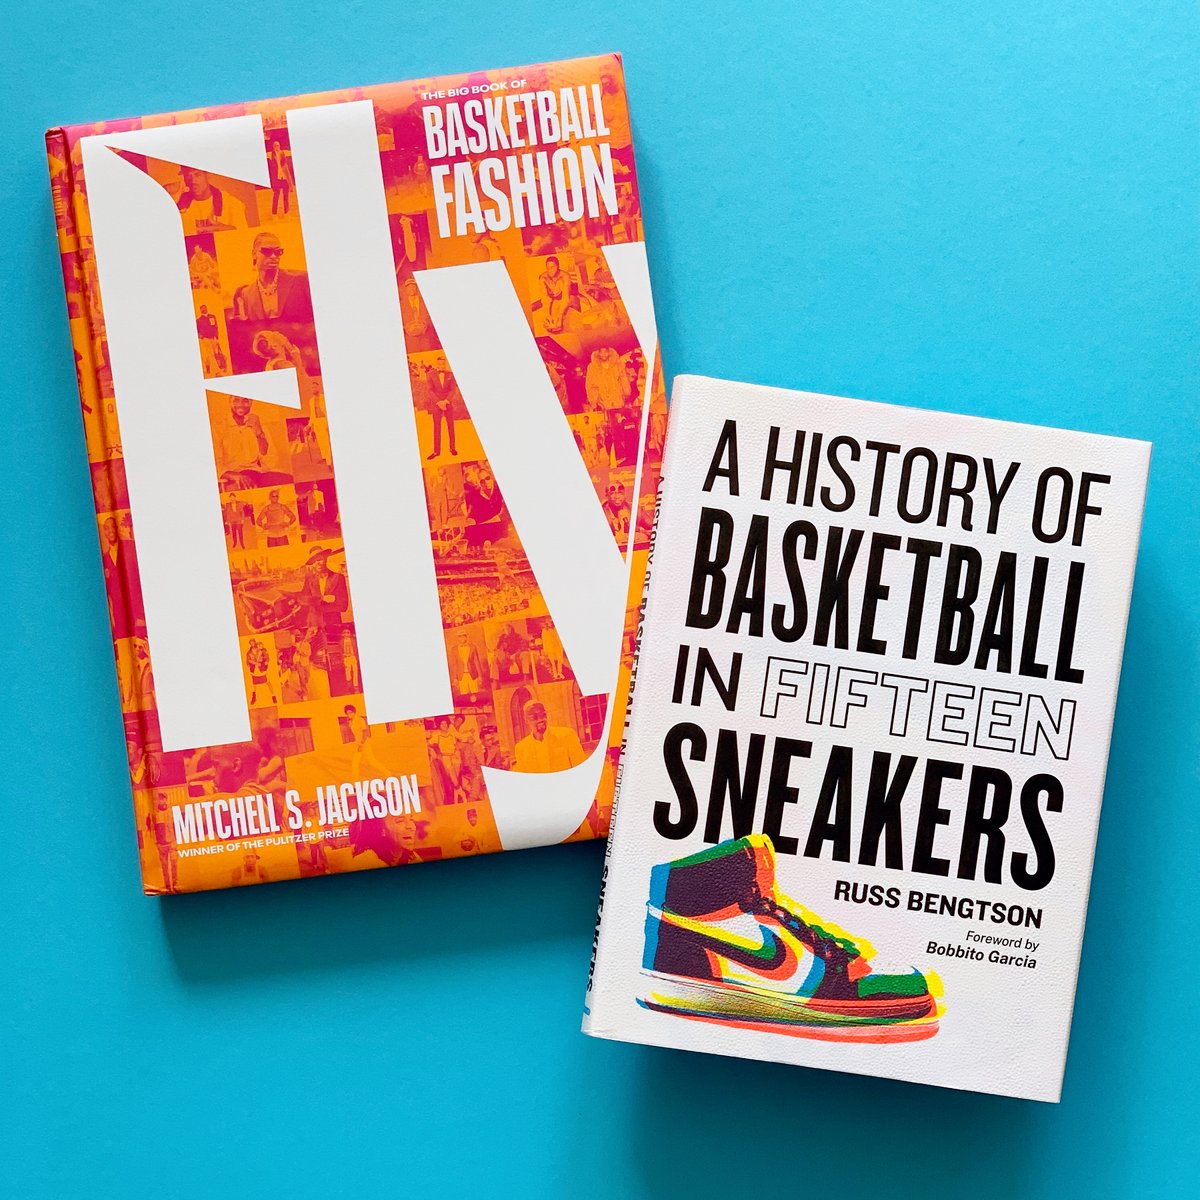 March Madness checklist: Comfy couch ✅ High-speed cable ✅ Appropriate commercial break reading material ✅ Grab a copy of these books to stay in the #basketball mindset and learn more about the history of the game. bit.ly/flybyMJ bit.ly/AHistoryOfBask…